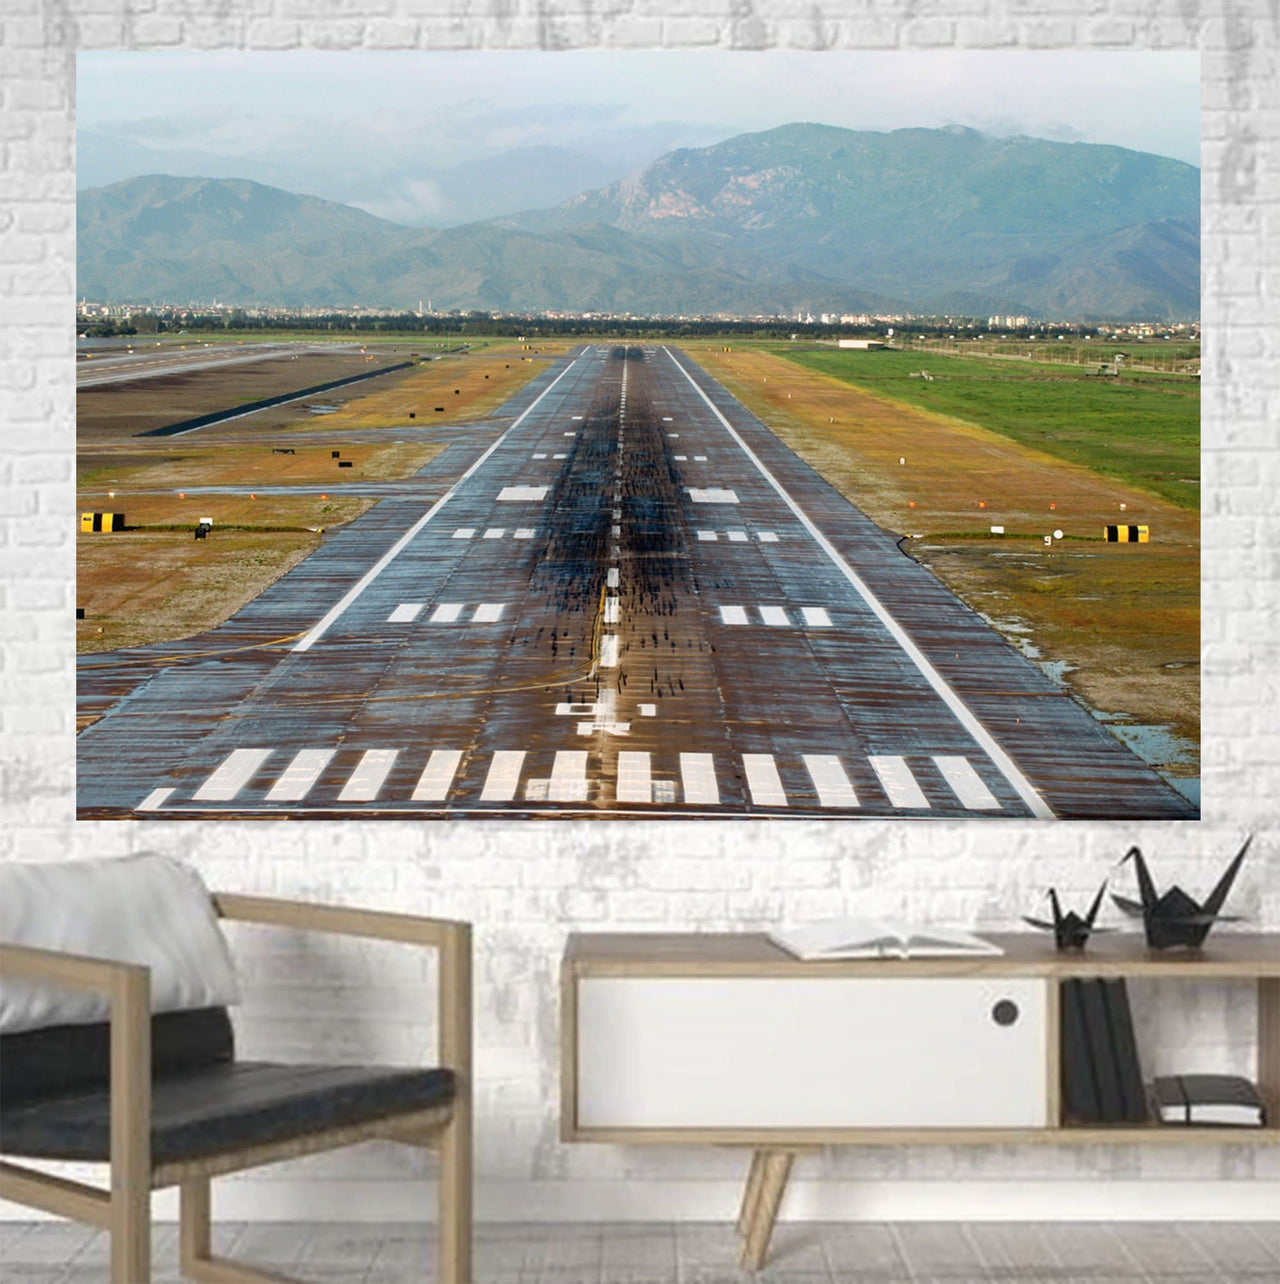 Amazing Mountain View & Runway Printed Printed Canvas Posters (1 Piece) Aviation Shop 